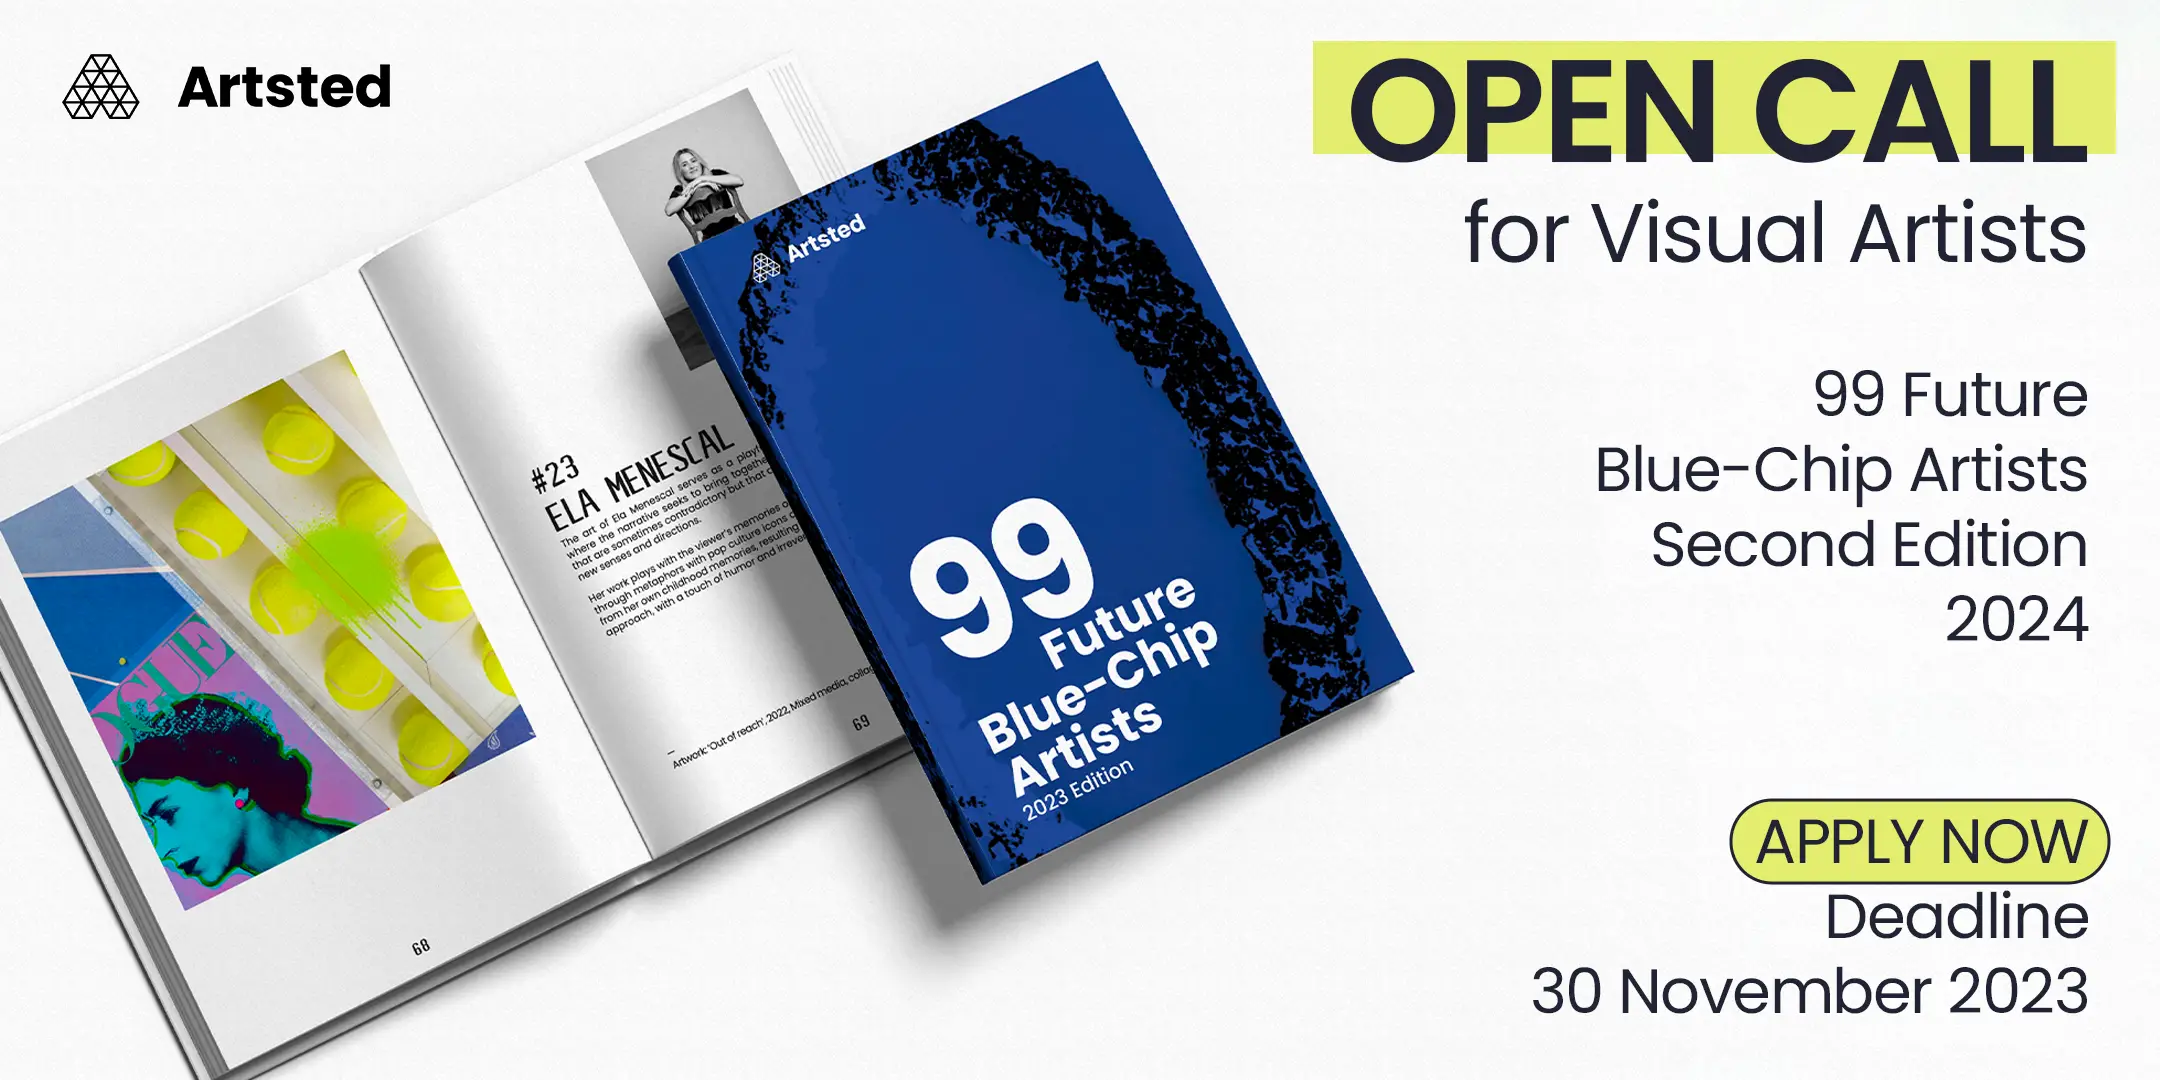 ARTSTED Announces the Second Edition of 99 Blue-Chip Artists Open Call